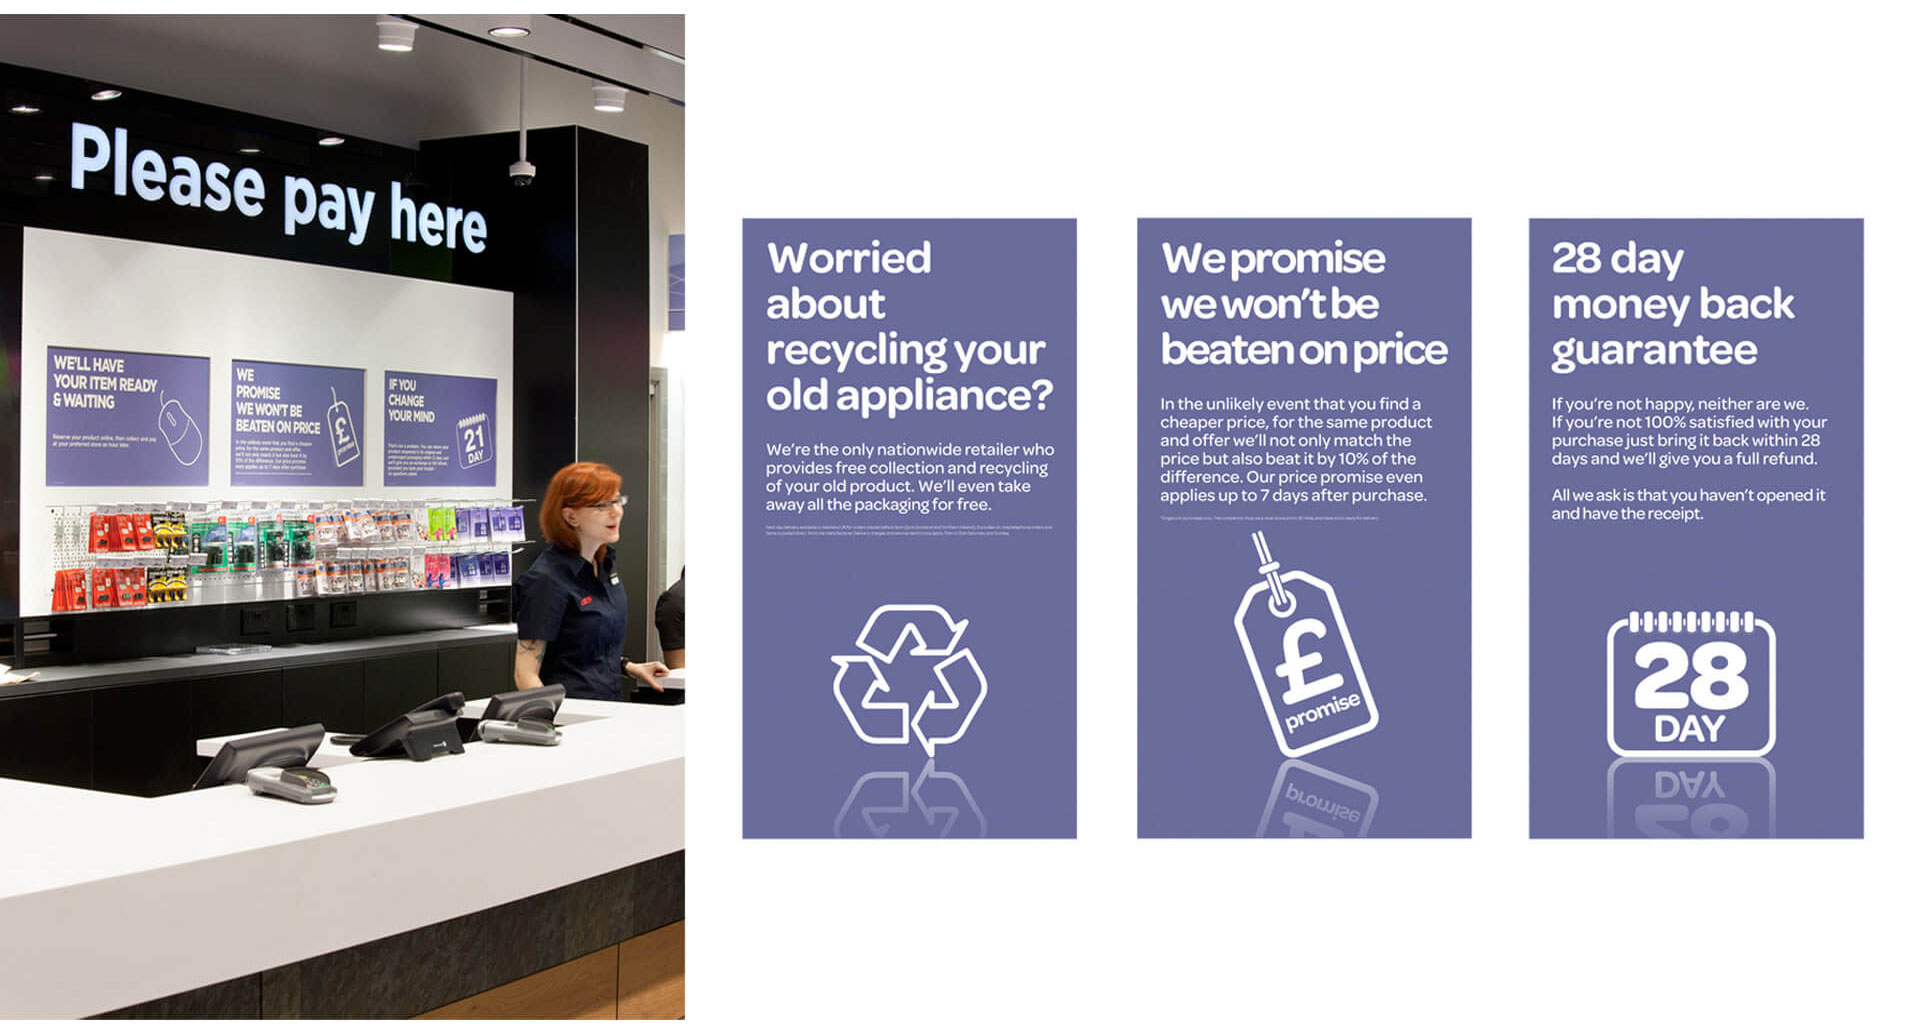 Currys PC World  cash desk in-store customer promise, recycling and 28 day money back guarantee communications